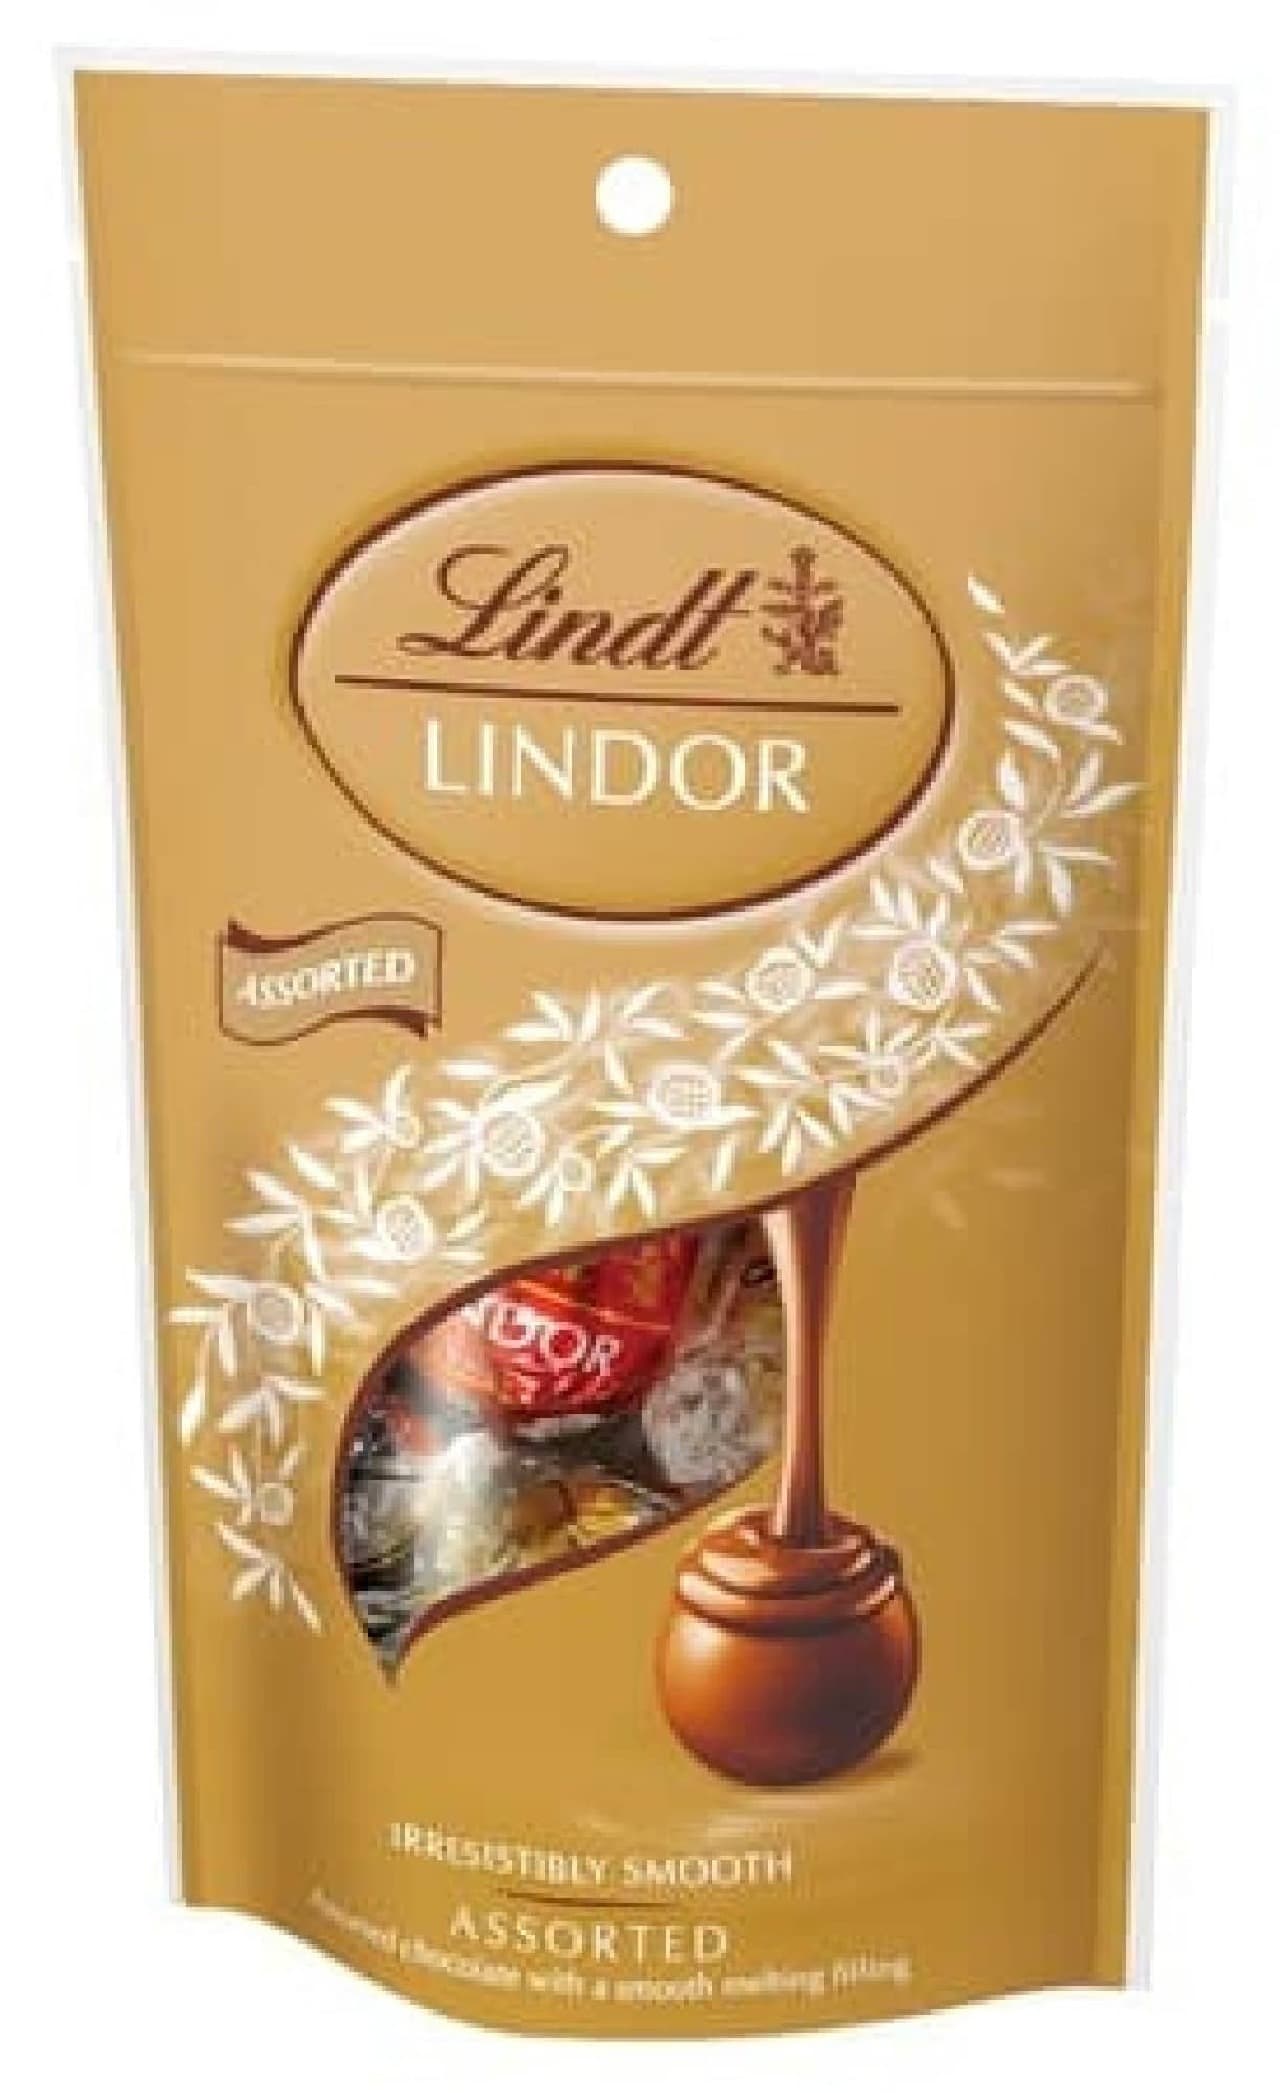 A package of 5 "Lindall" is now a thank you mart! 5 types including milk, hazelnuts and salted caramel